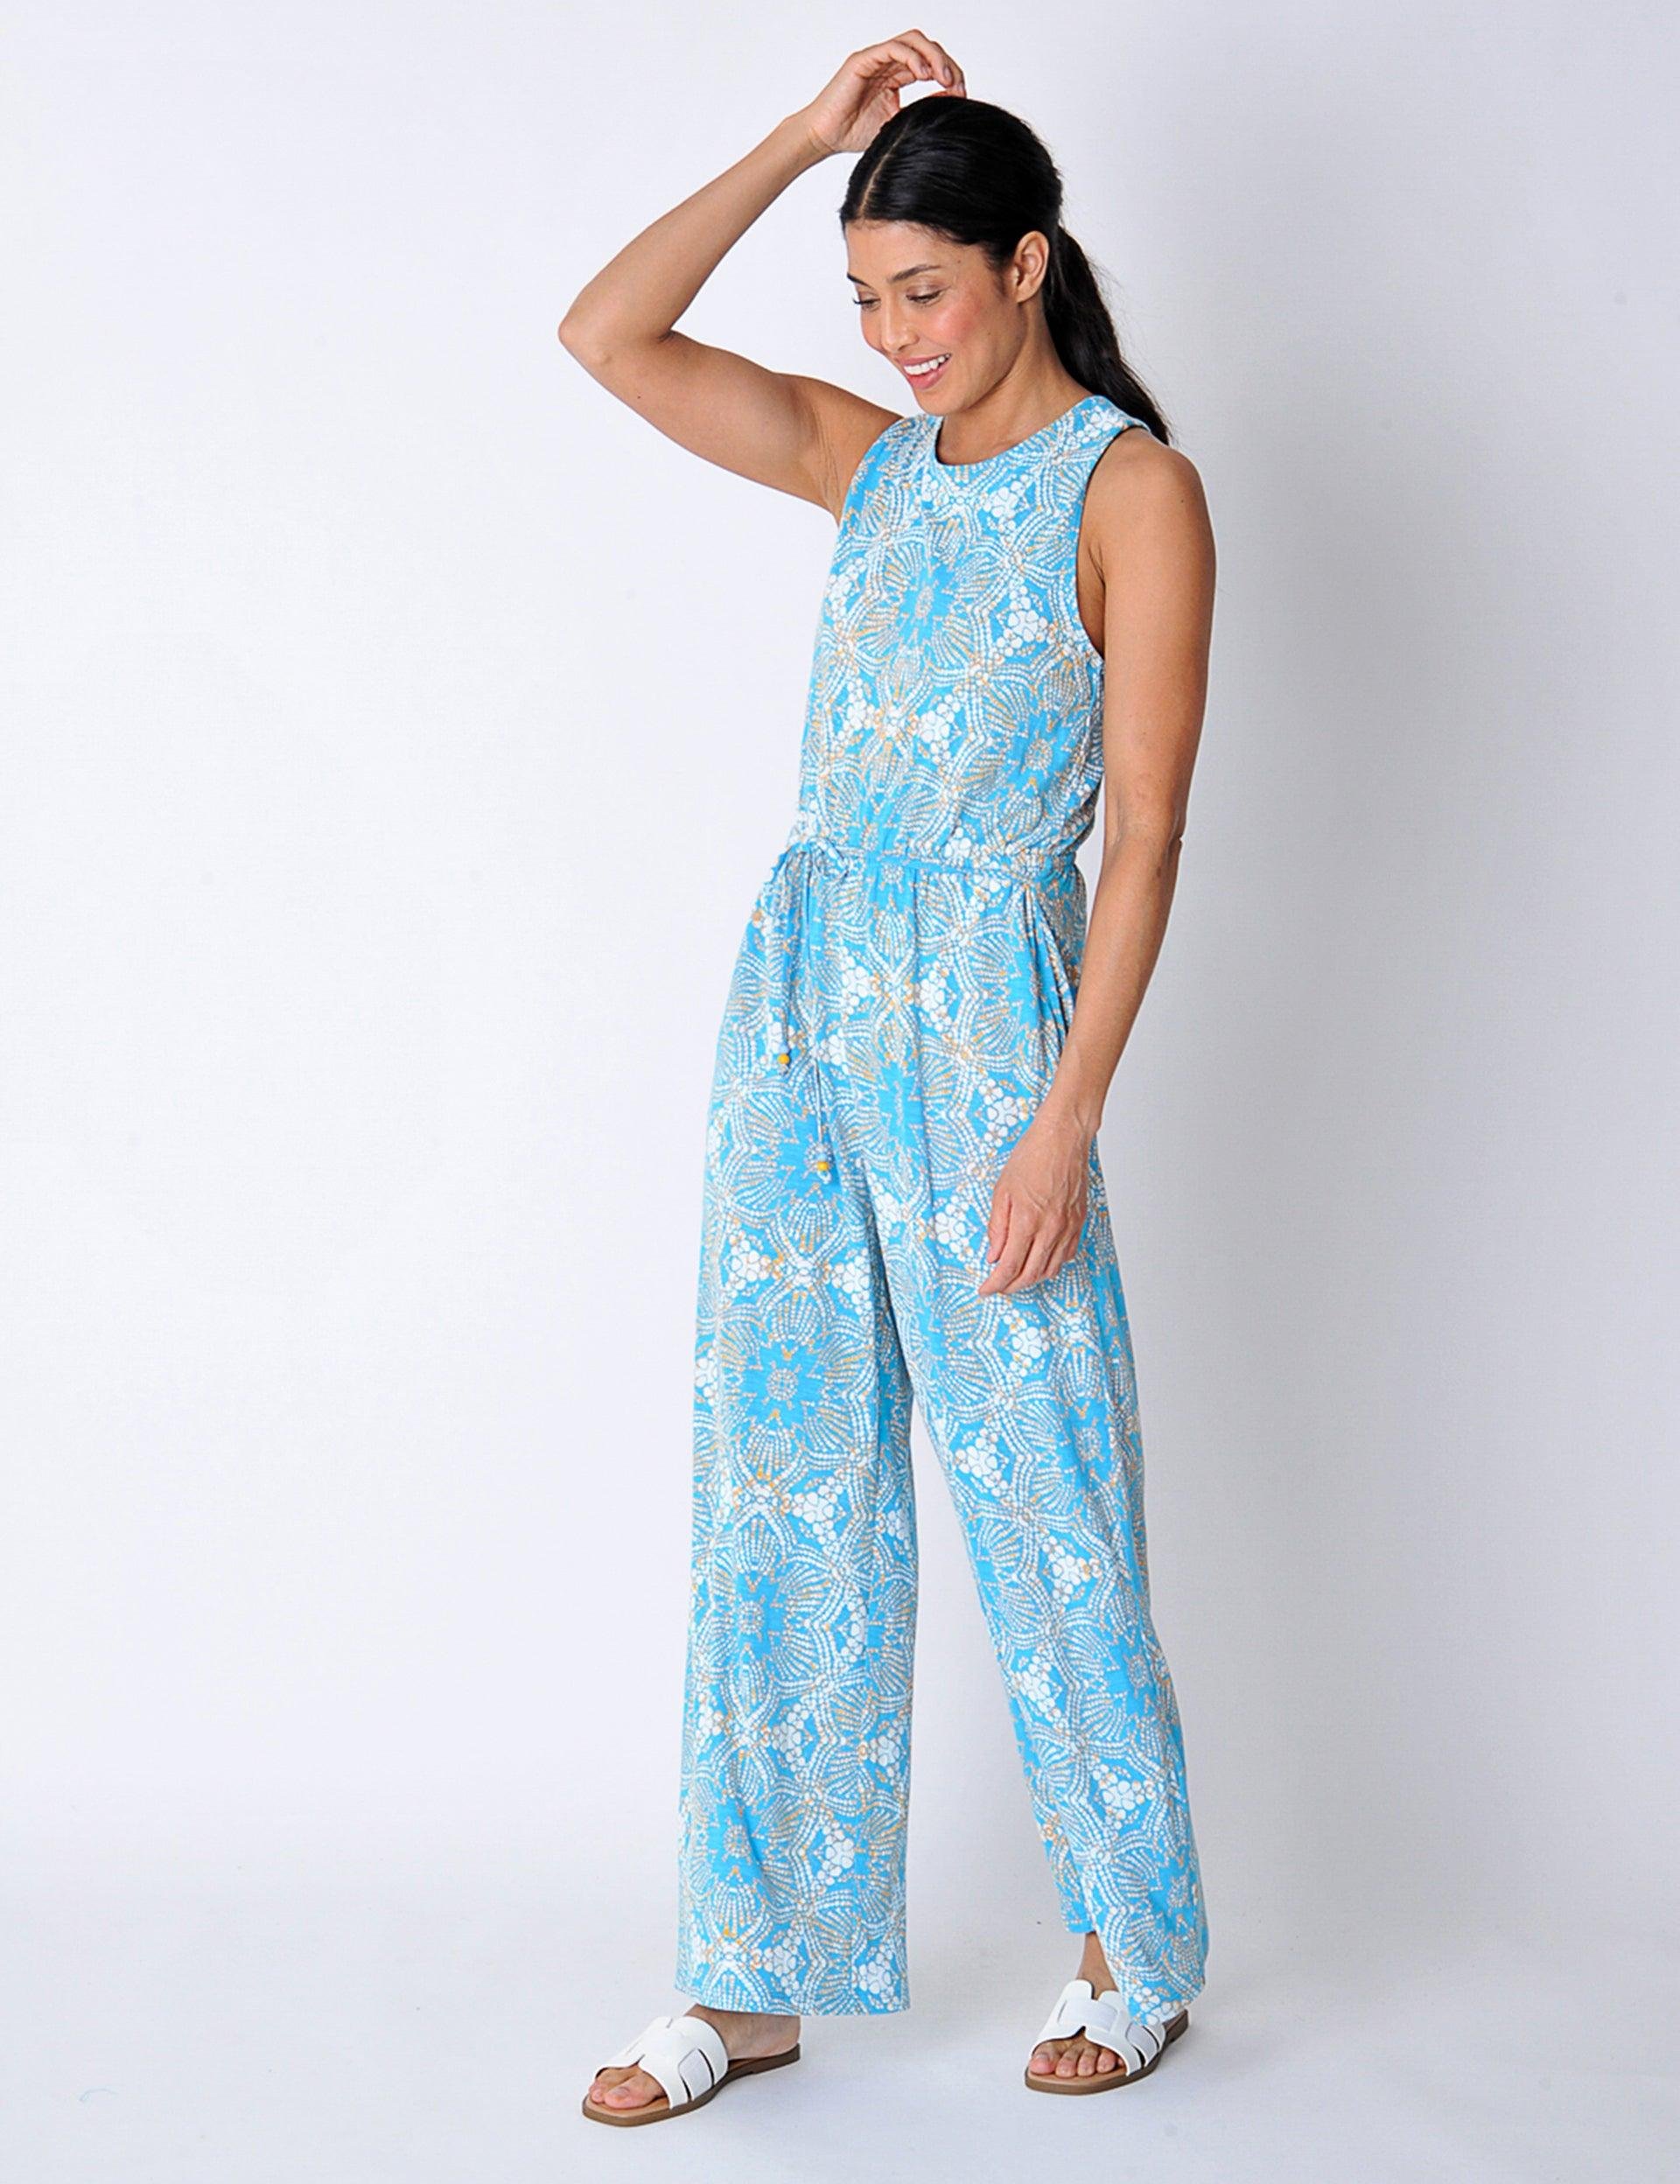 Hillend Jumpsuit in Turquoise by BURGS